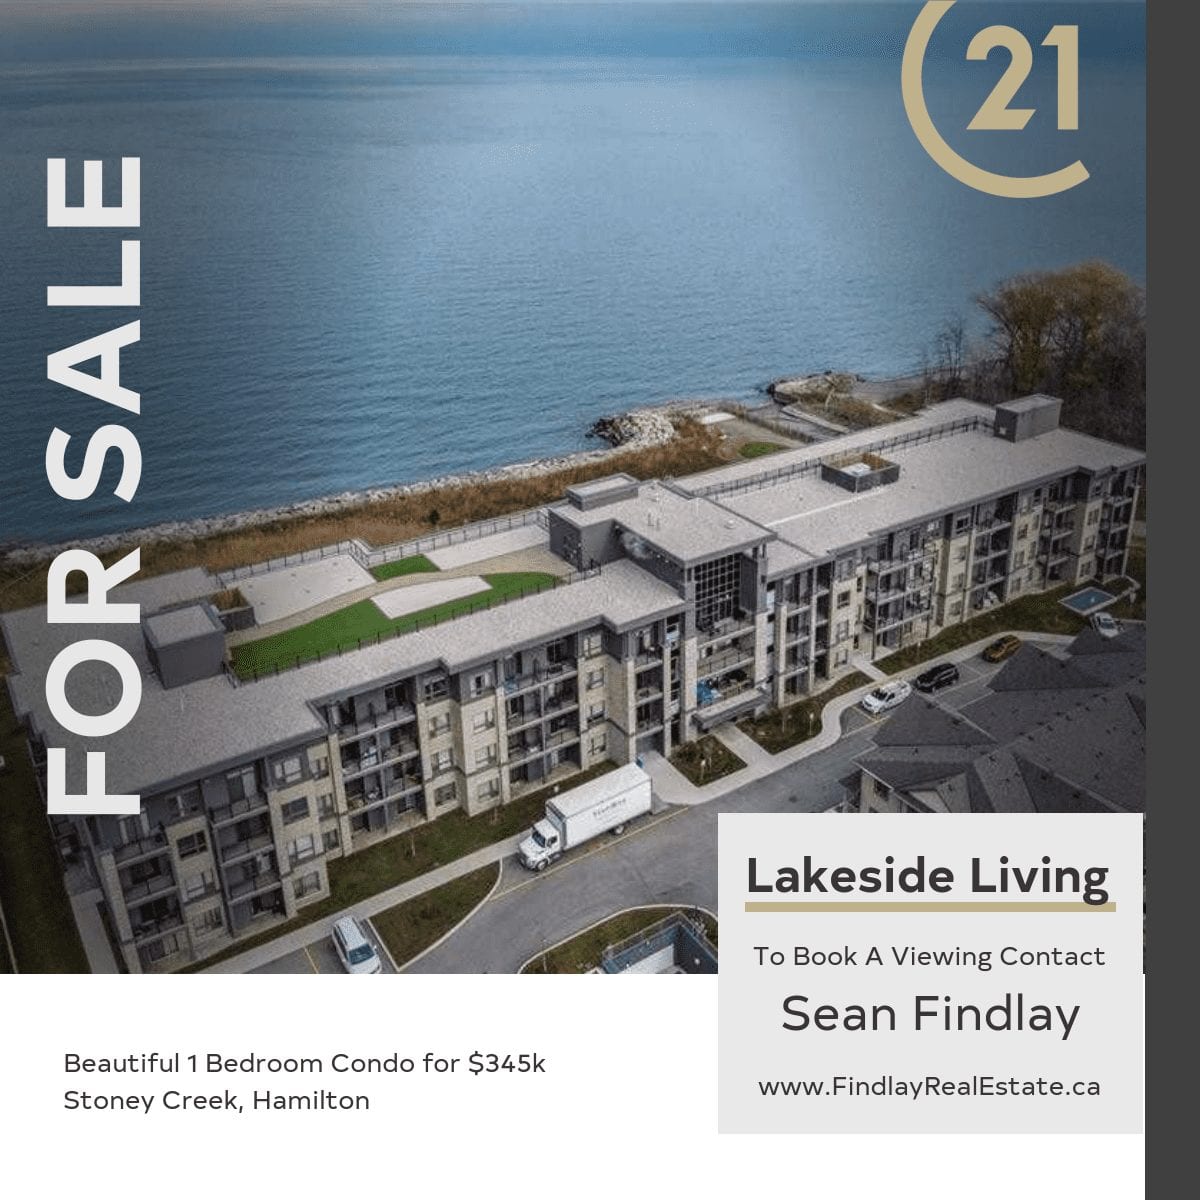 Beautiful Stoney Creek Lakeside Condos For Sale: Move in Winter/Spring 2020